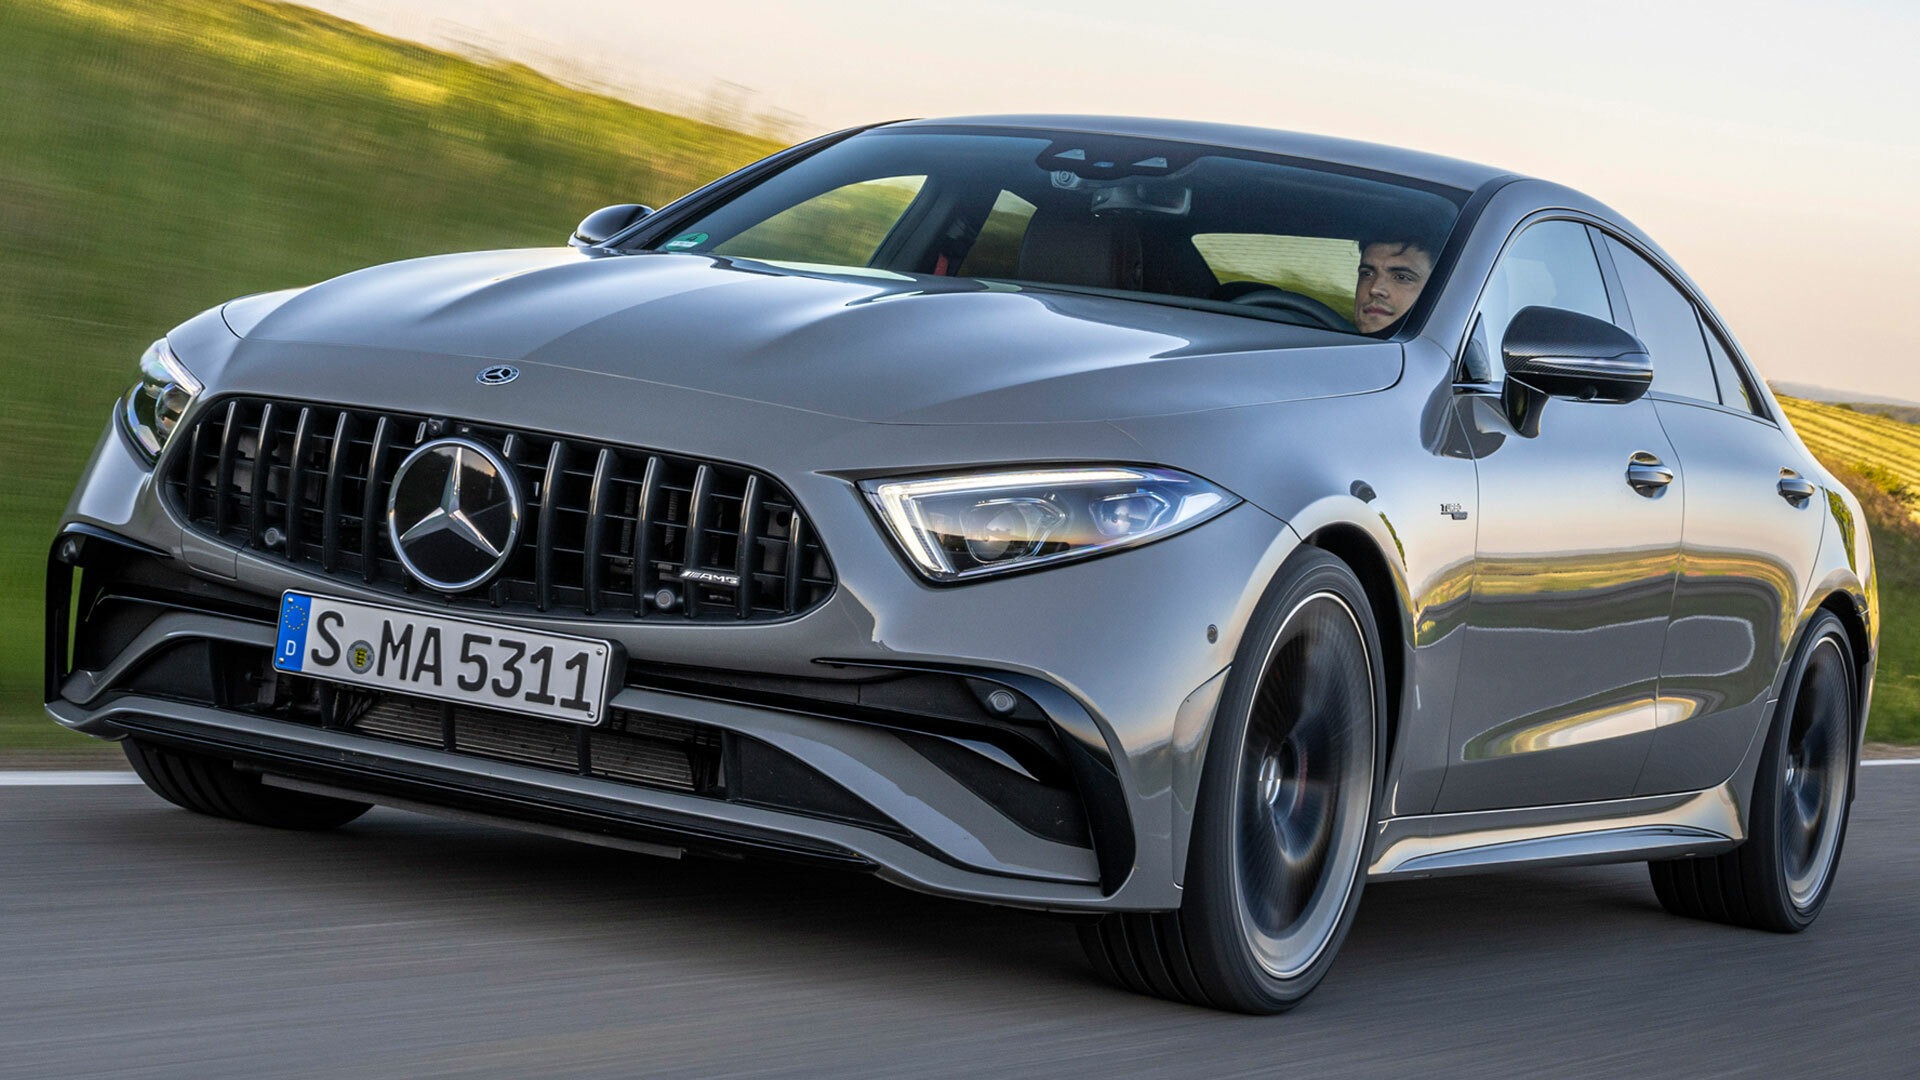 Mercedes Reportedly Going On A Killing Spree: Coupes, Wagons, And CLS To Be Axed - CarScoops